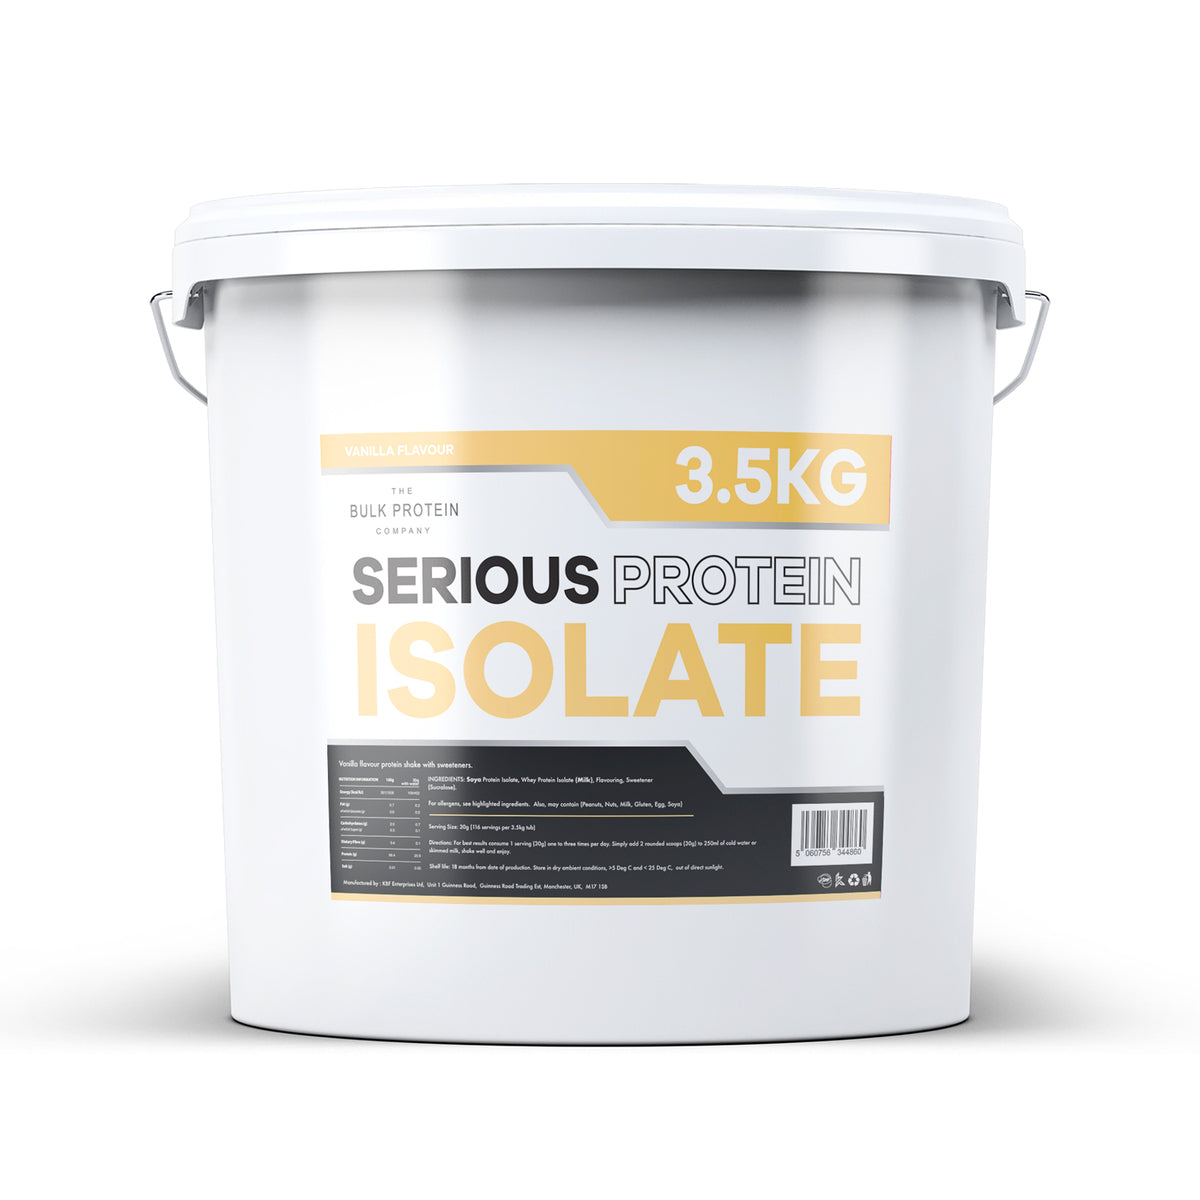 The Bulk Protein Company Serious Protein Isolate €“ 3.5kg